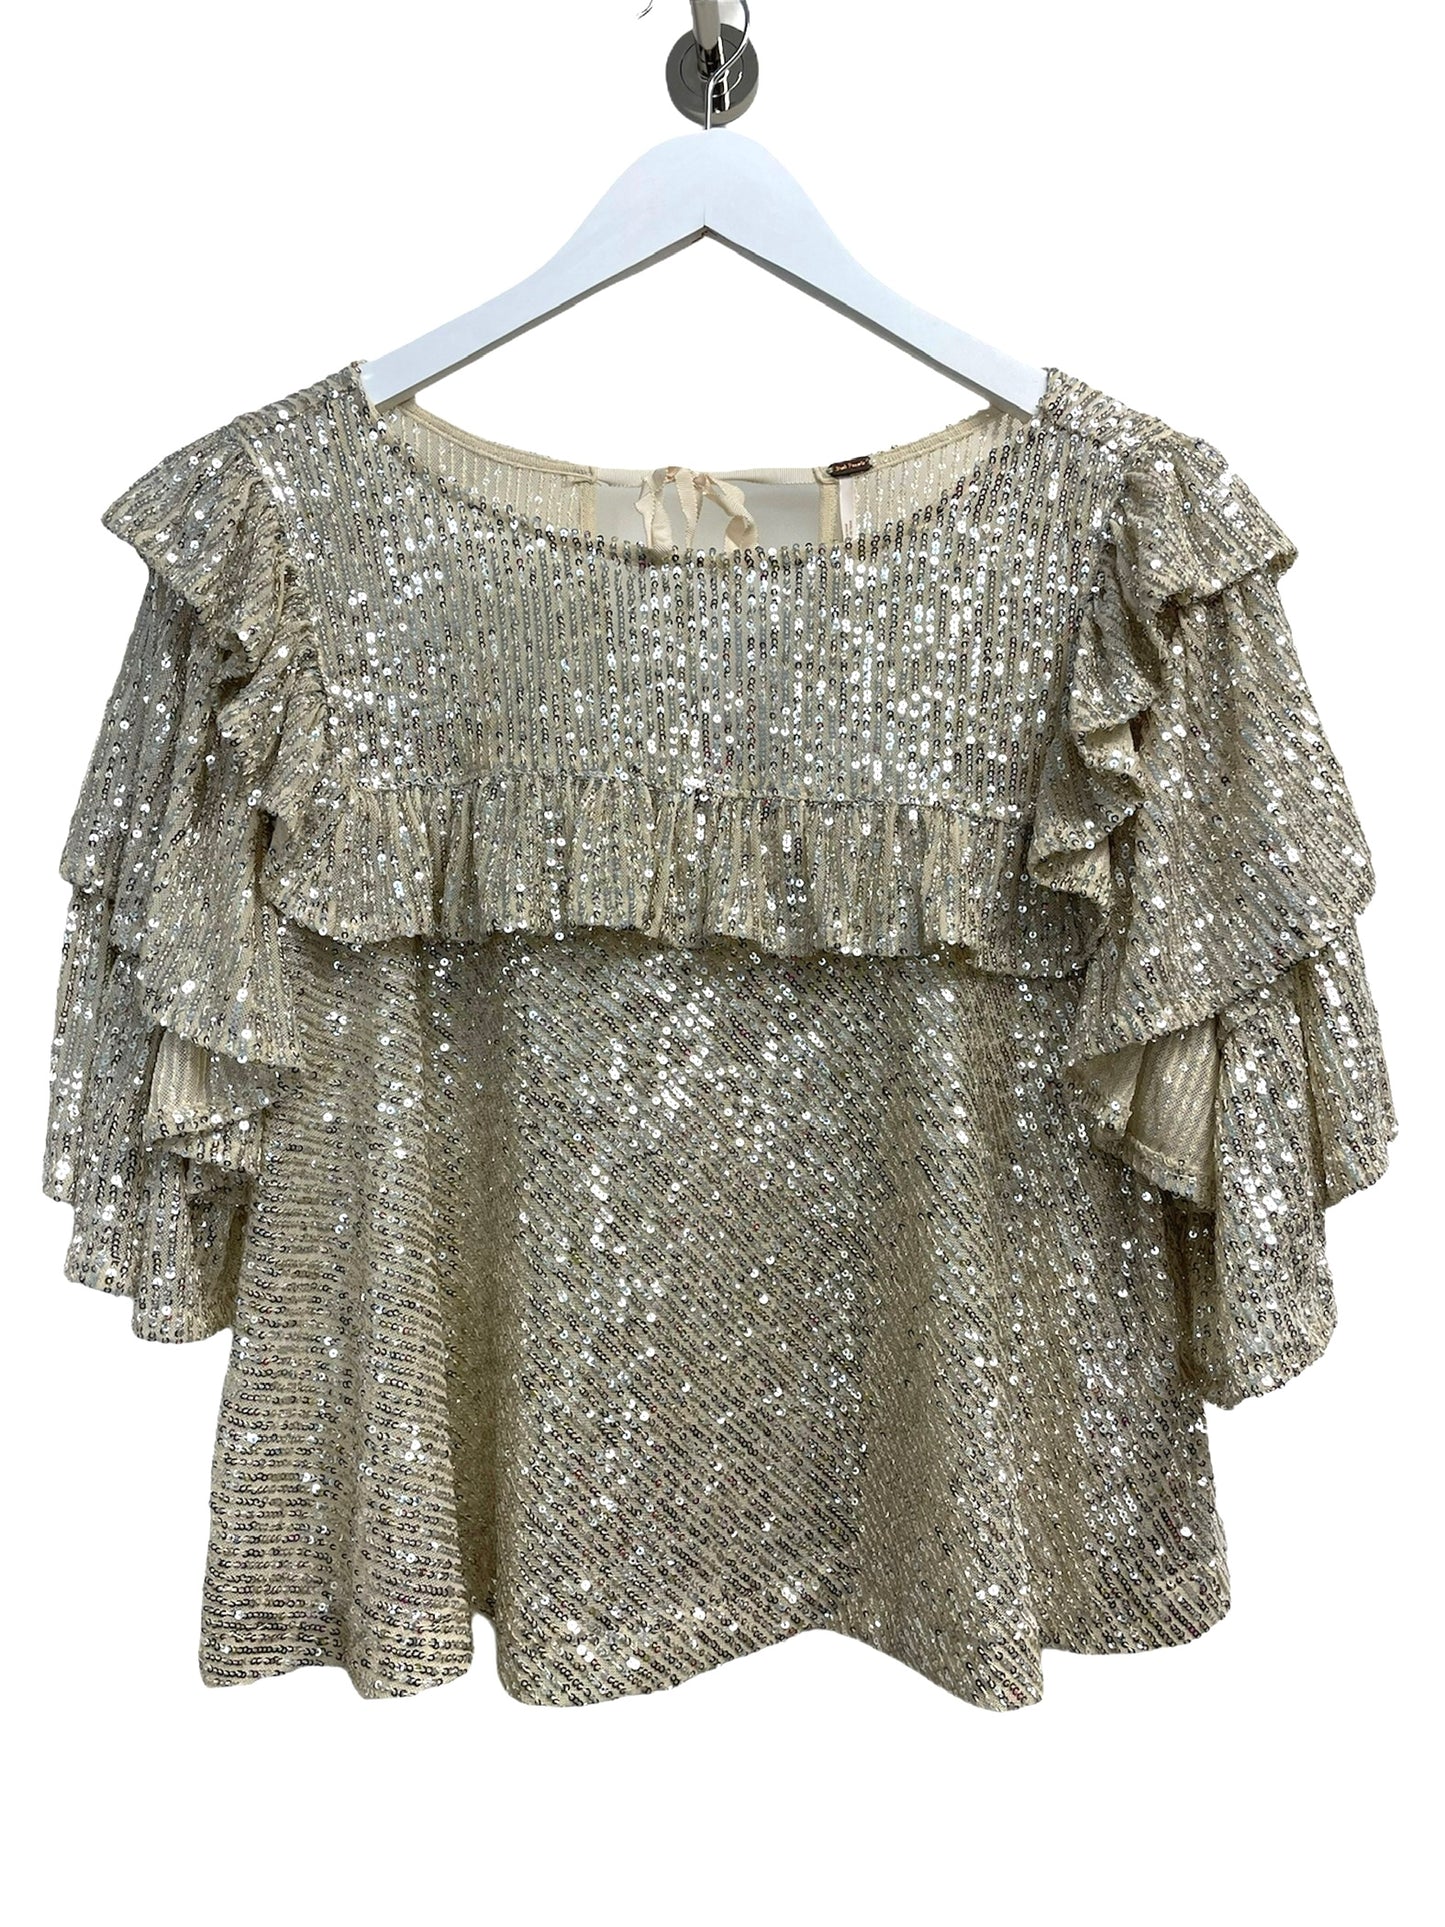 Free People Women's Tess Daly's Magical Sparkly Sequin Top Silver